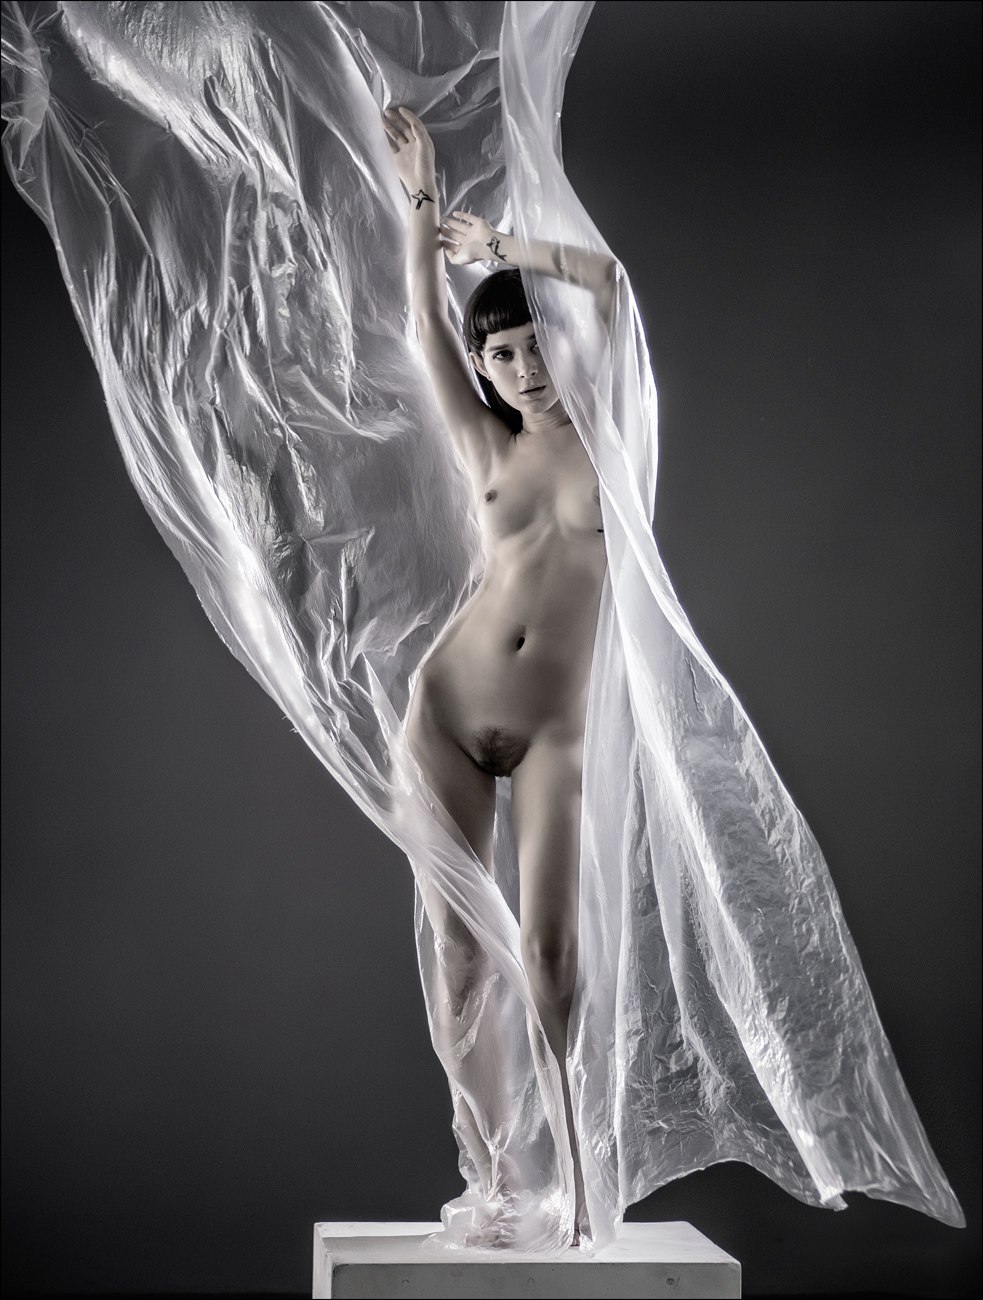 and more of great Polina Knyazevaby great ©Pavel Kiselevbest of erotic photography:www.radical-lingerie.com